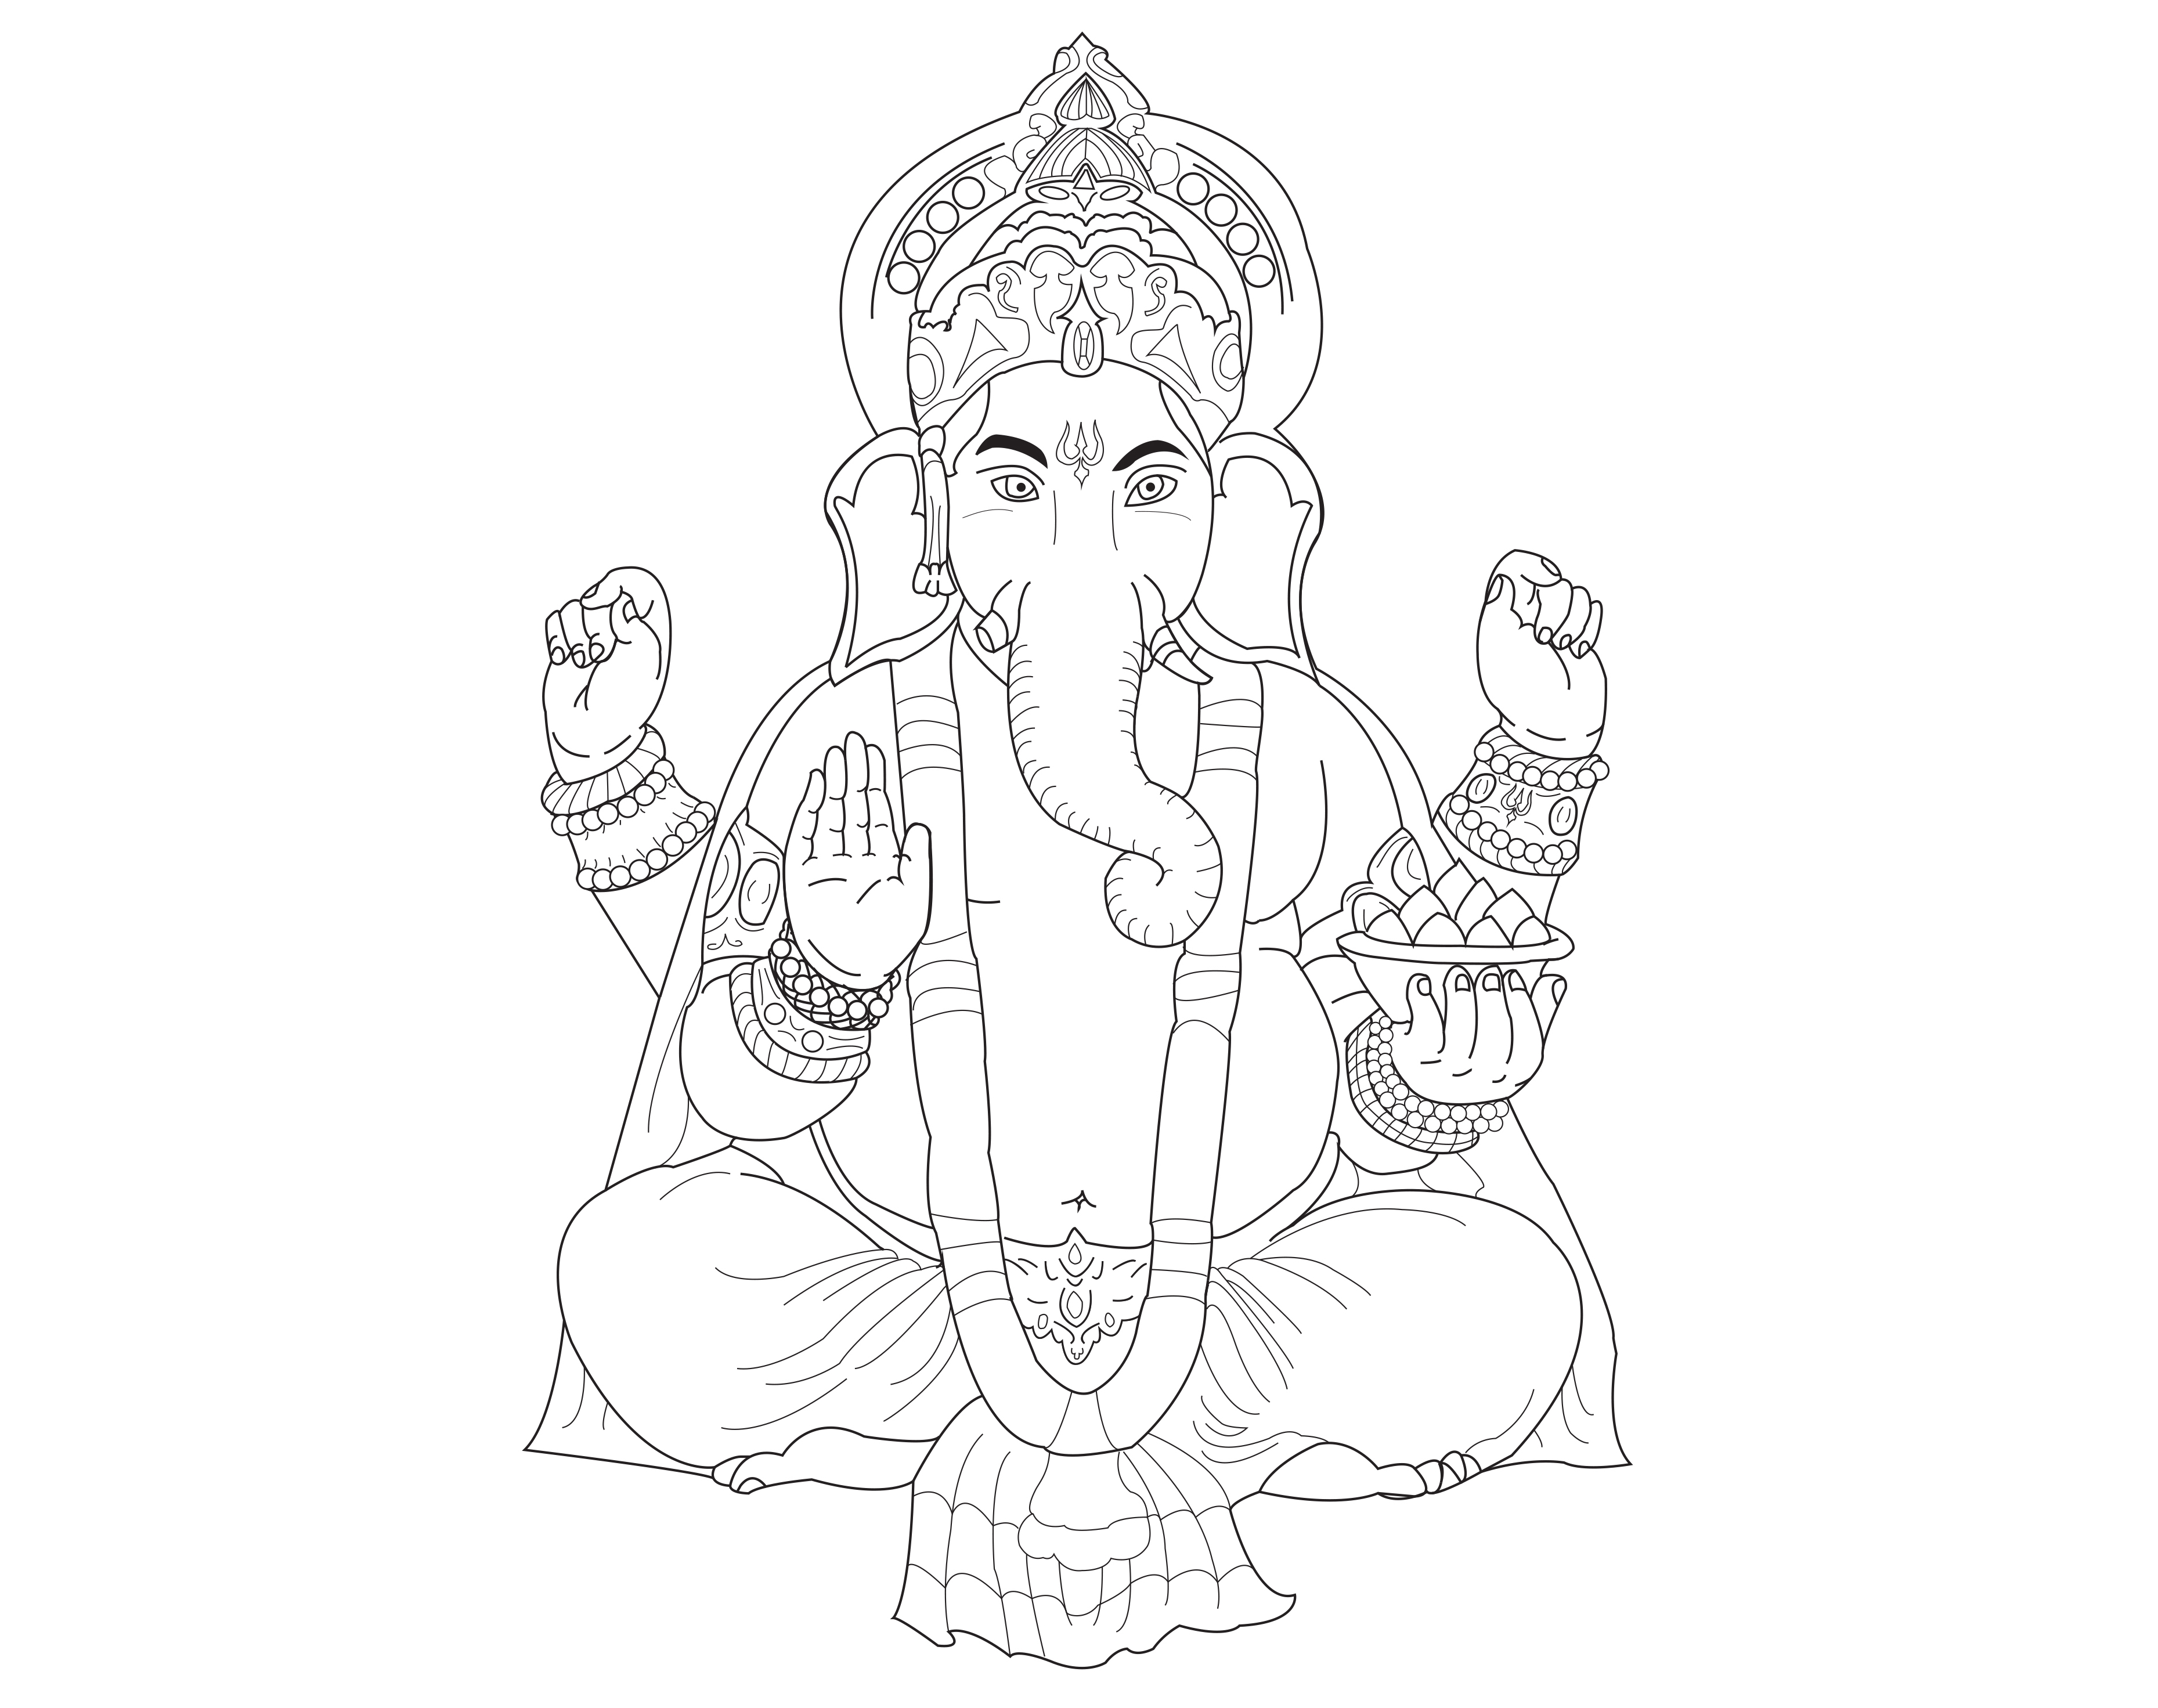 Ganesh Allan - India Adult Coloring Pages